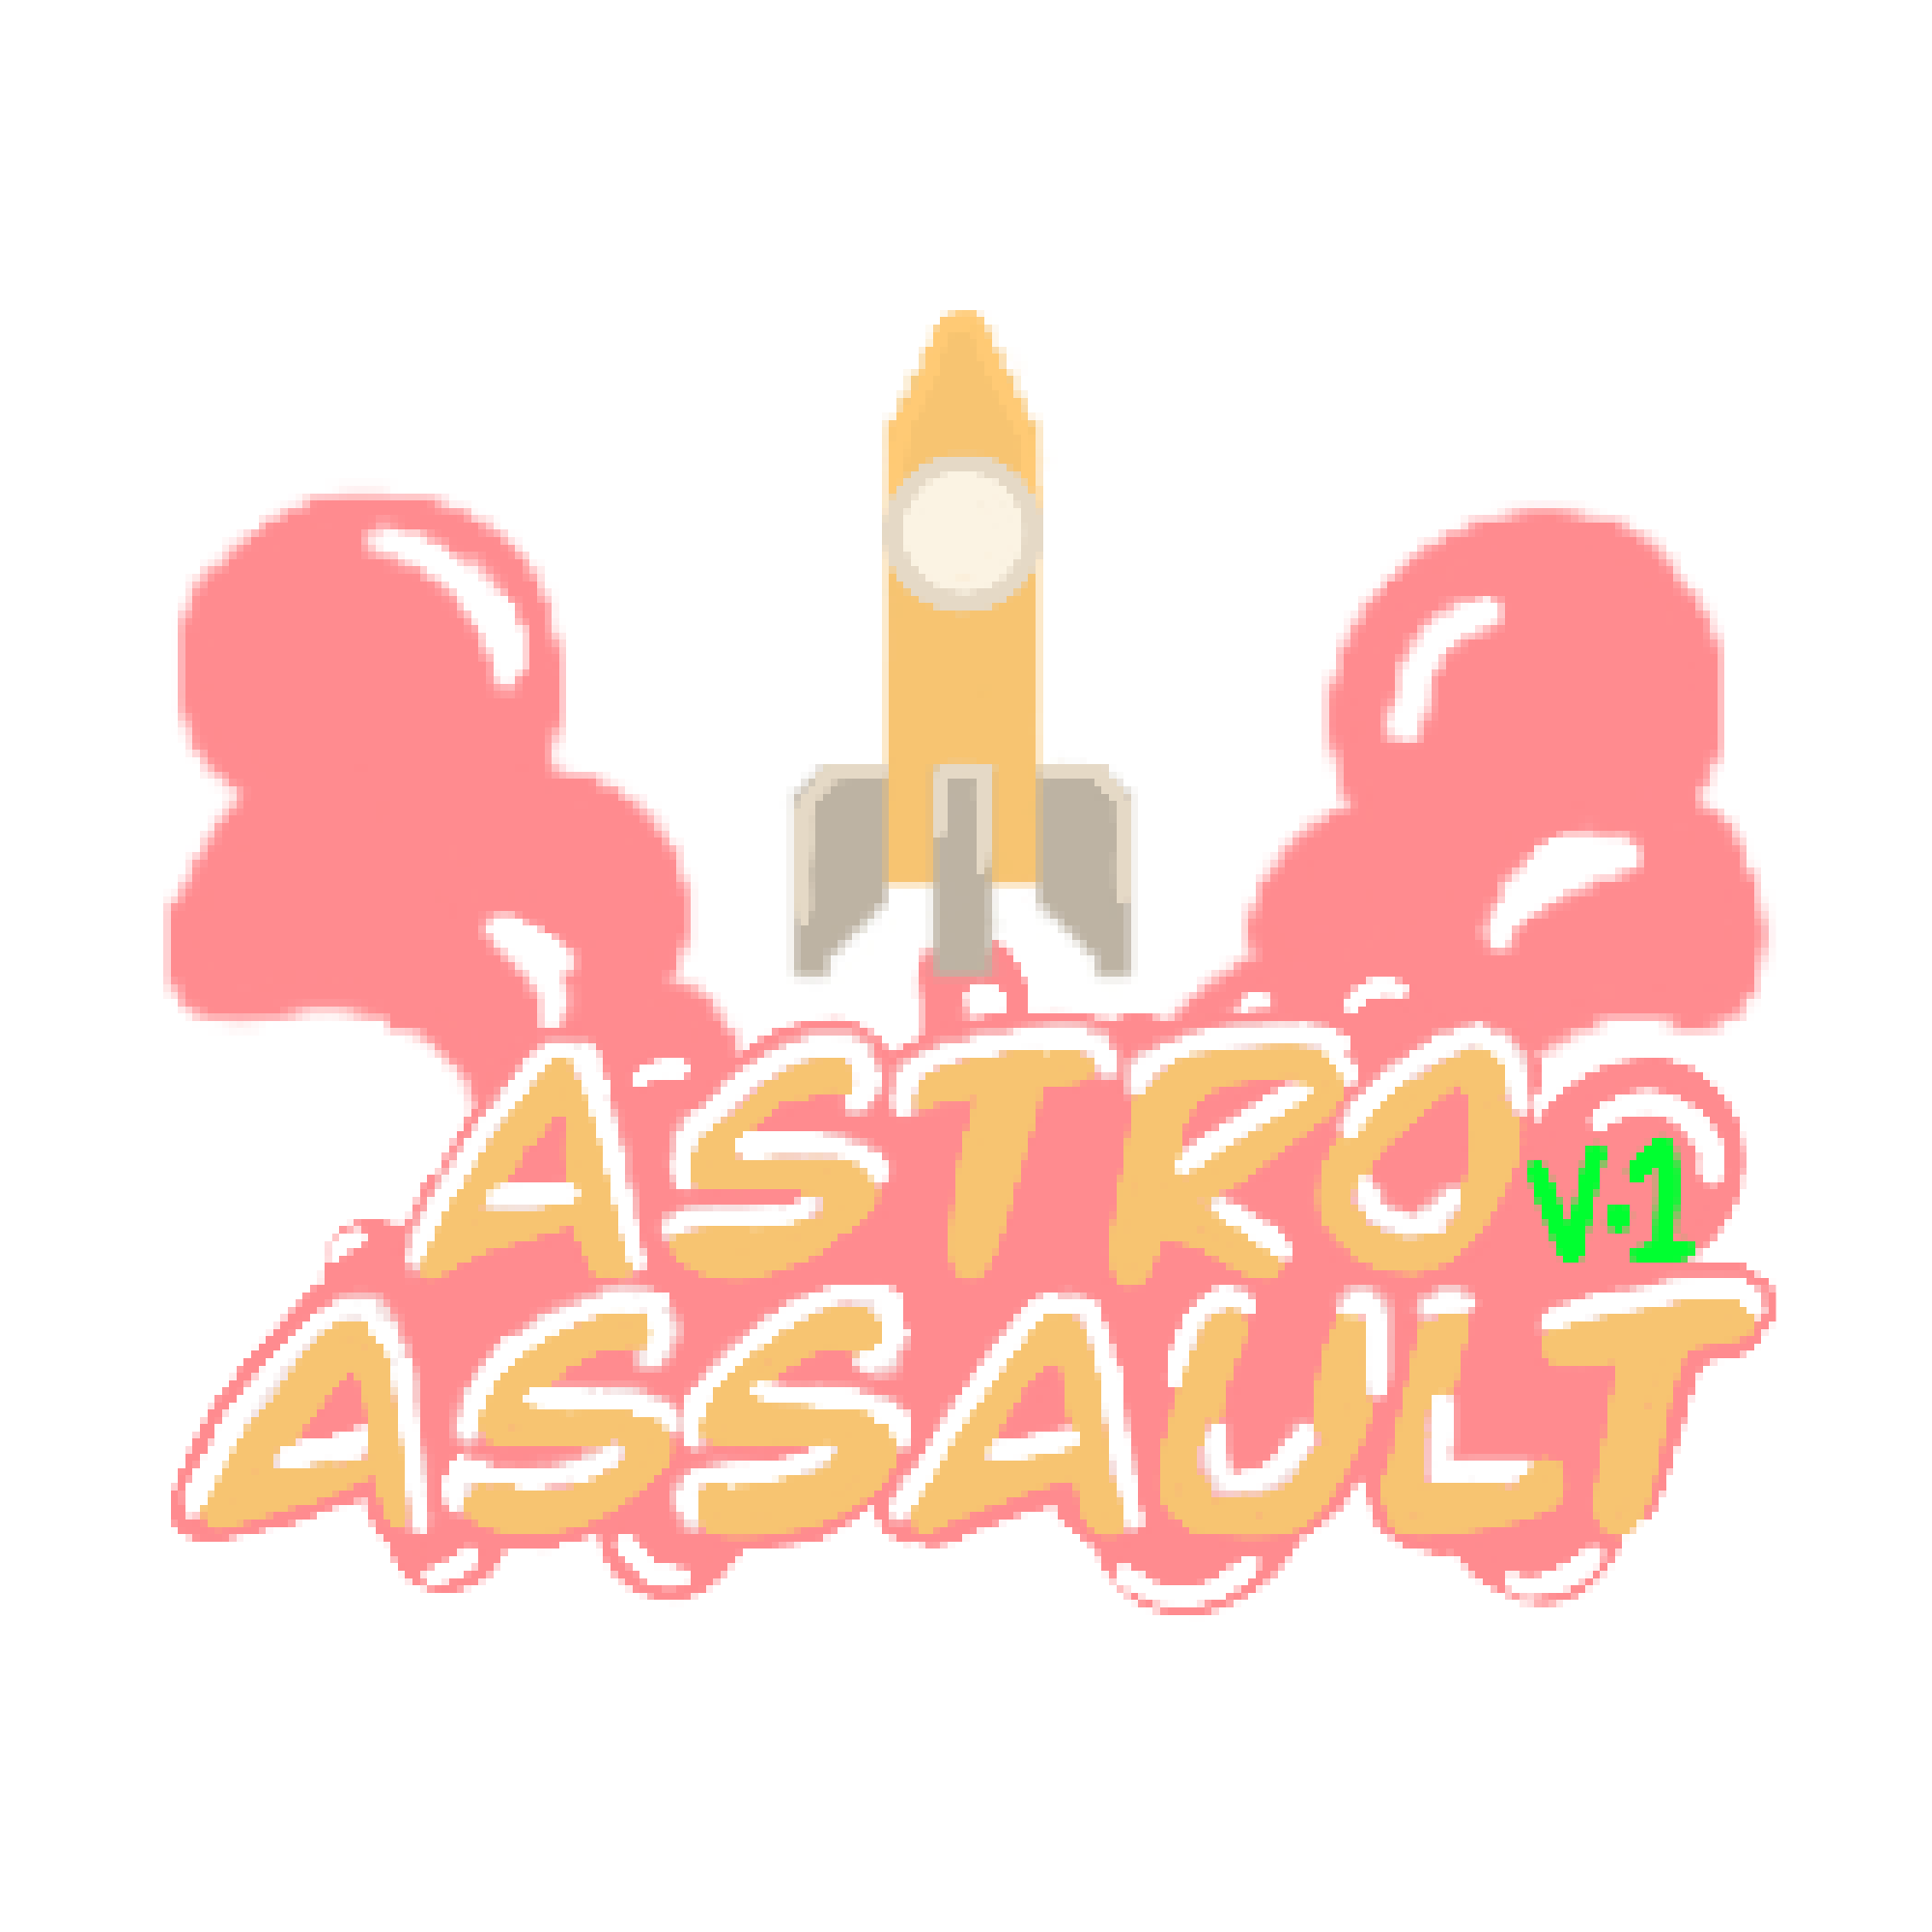 Astro Assault (end of support)